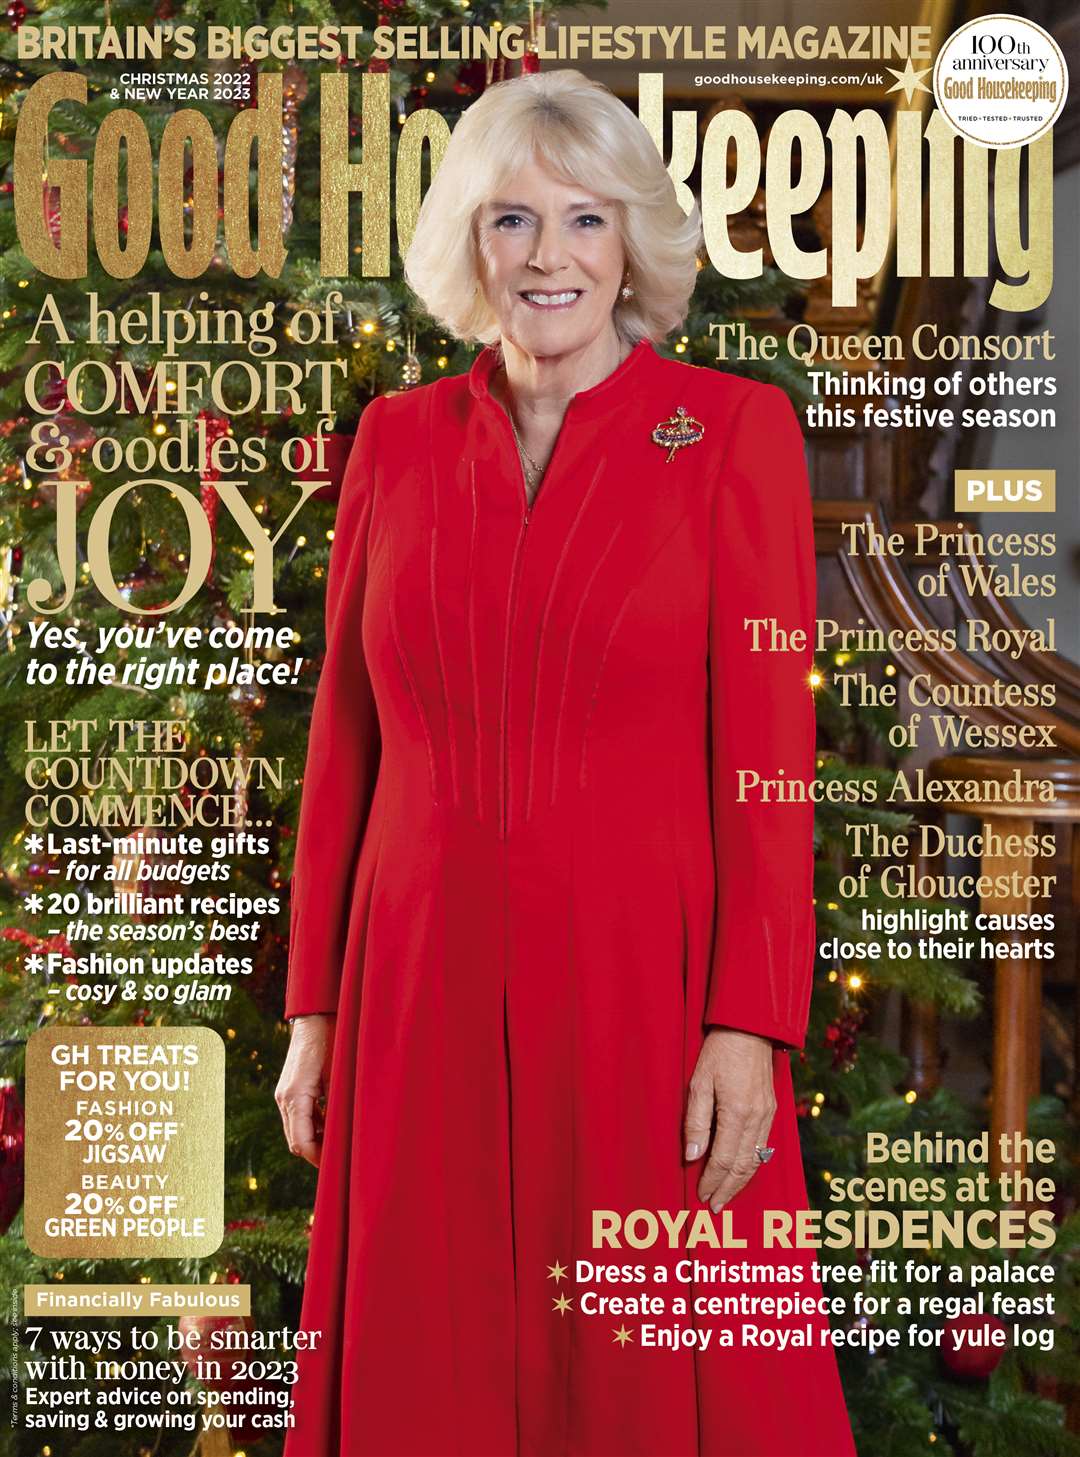 The Queen Consort is the cover star of the Christmas 2022 and New Year 2023 edition of Good Housekeeping (Good Housekeeping/Hugo Burnand/hugofoto.com/Telegraph Media Group Limited/PA)